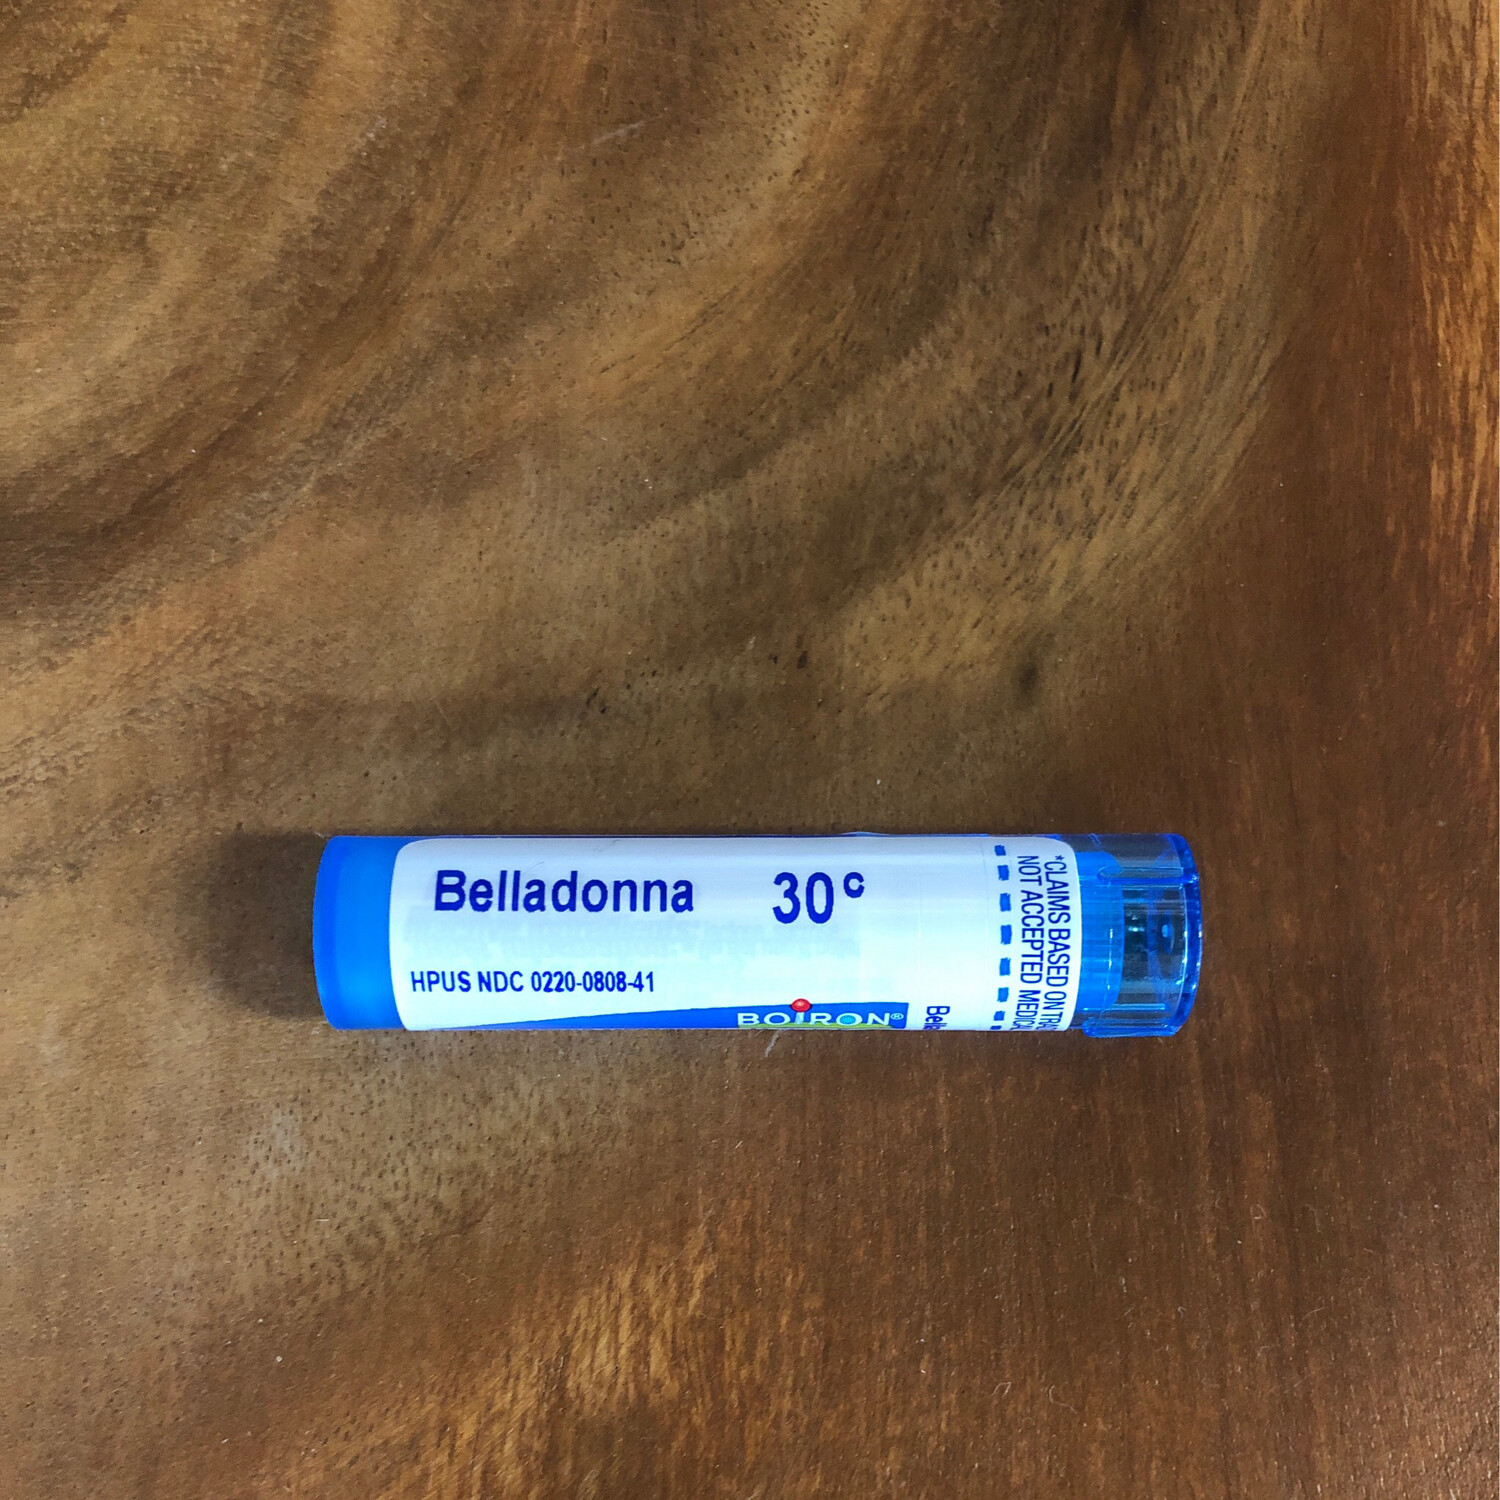 Belladonna (High fever of sudden onset with perspiration)